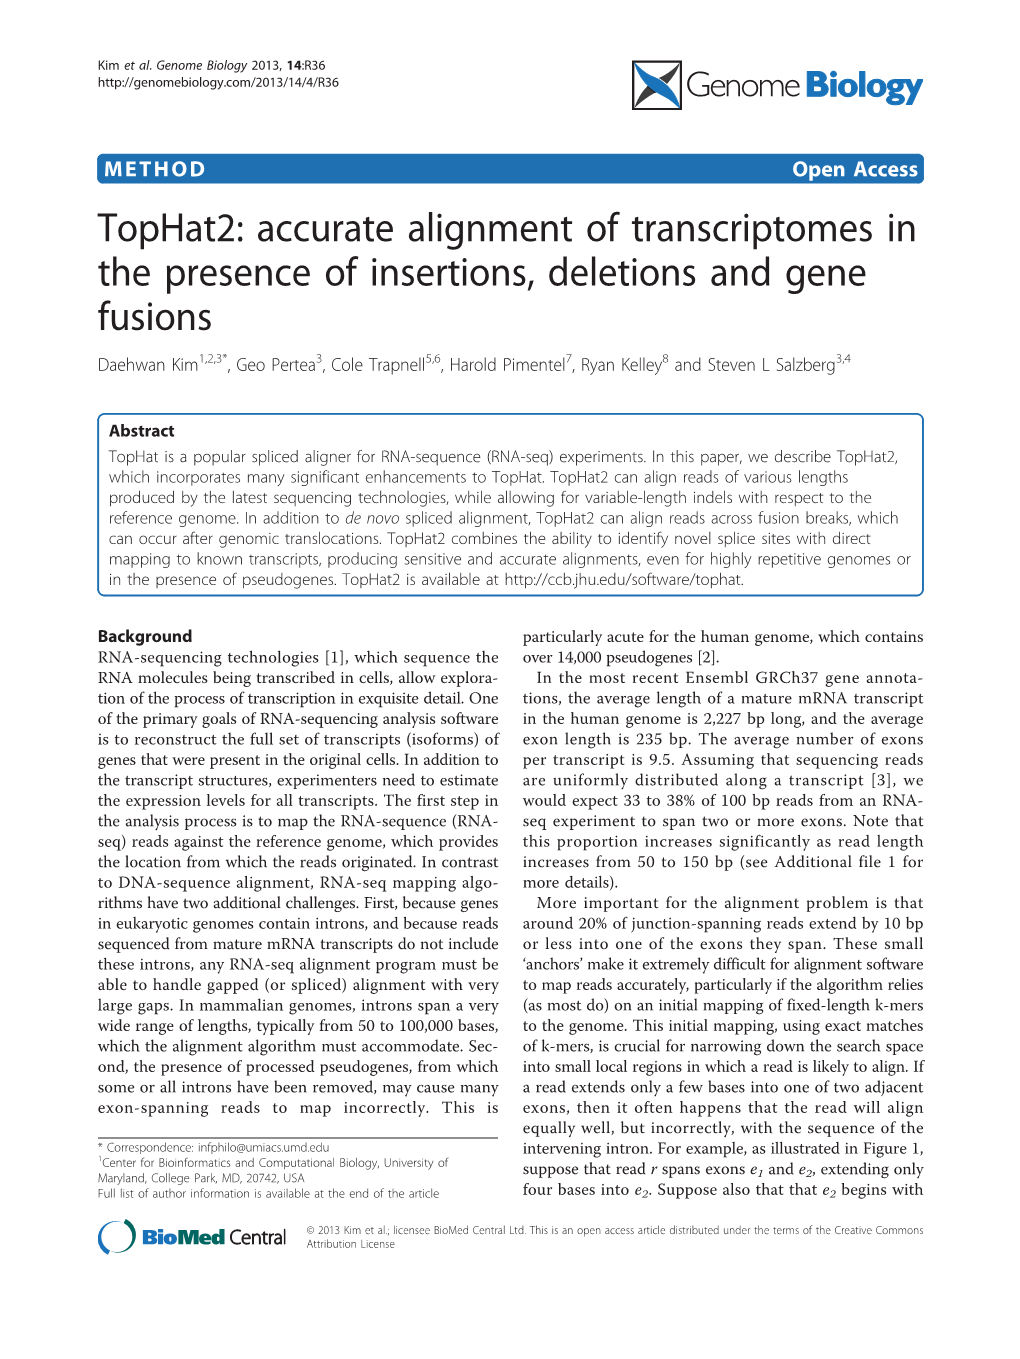 Tophat2: Accurate Alignment of Transcriptomes in the Presence Of